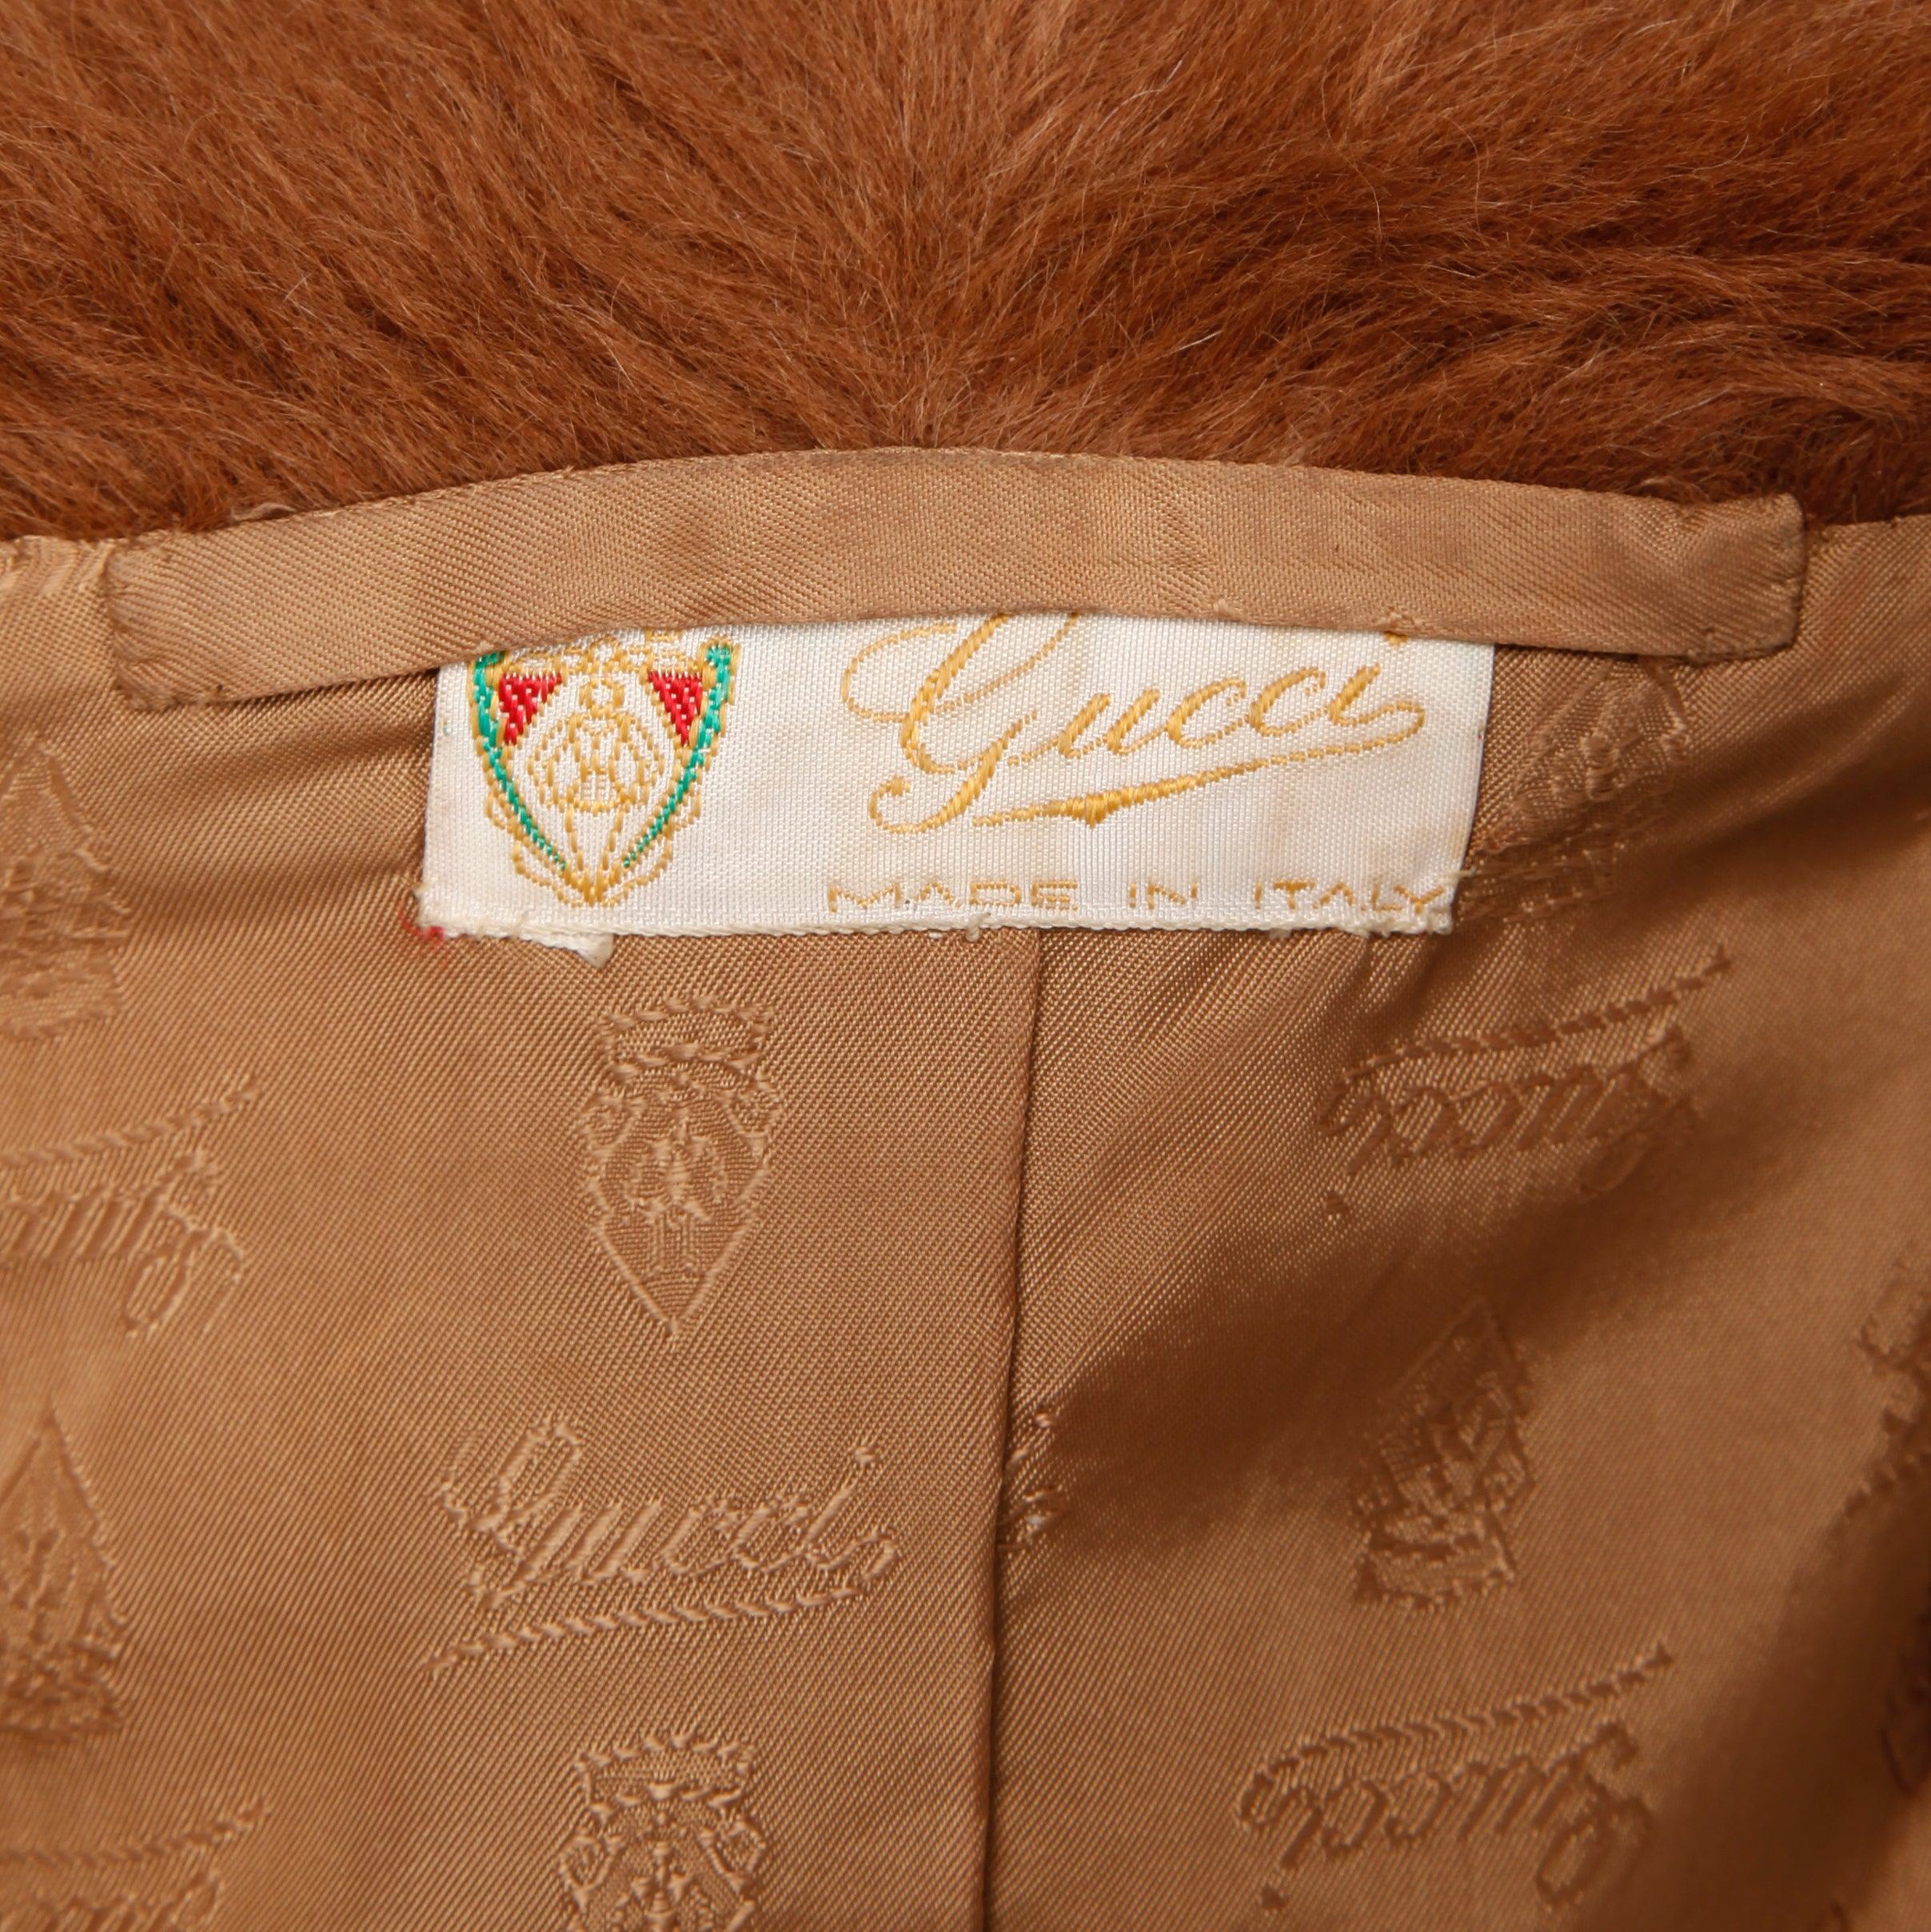 Very rare 1970s vintage Gucci jacket in leather and mohair! From the estate of Pamela Lewis (Jerry Lewis/ Gary Lewis). Fully lined with front zip closure and red/ green horse bit detail at the neck. The lining is a tan fabric and features an